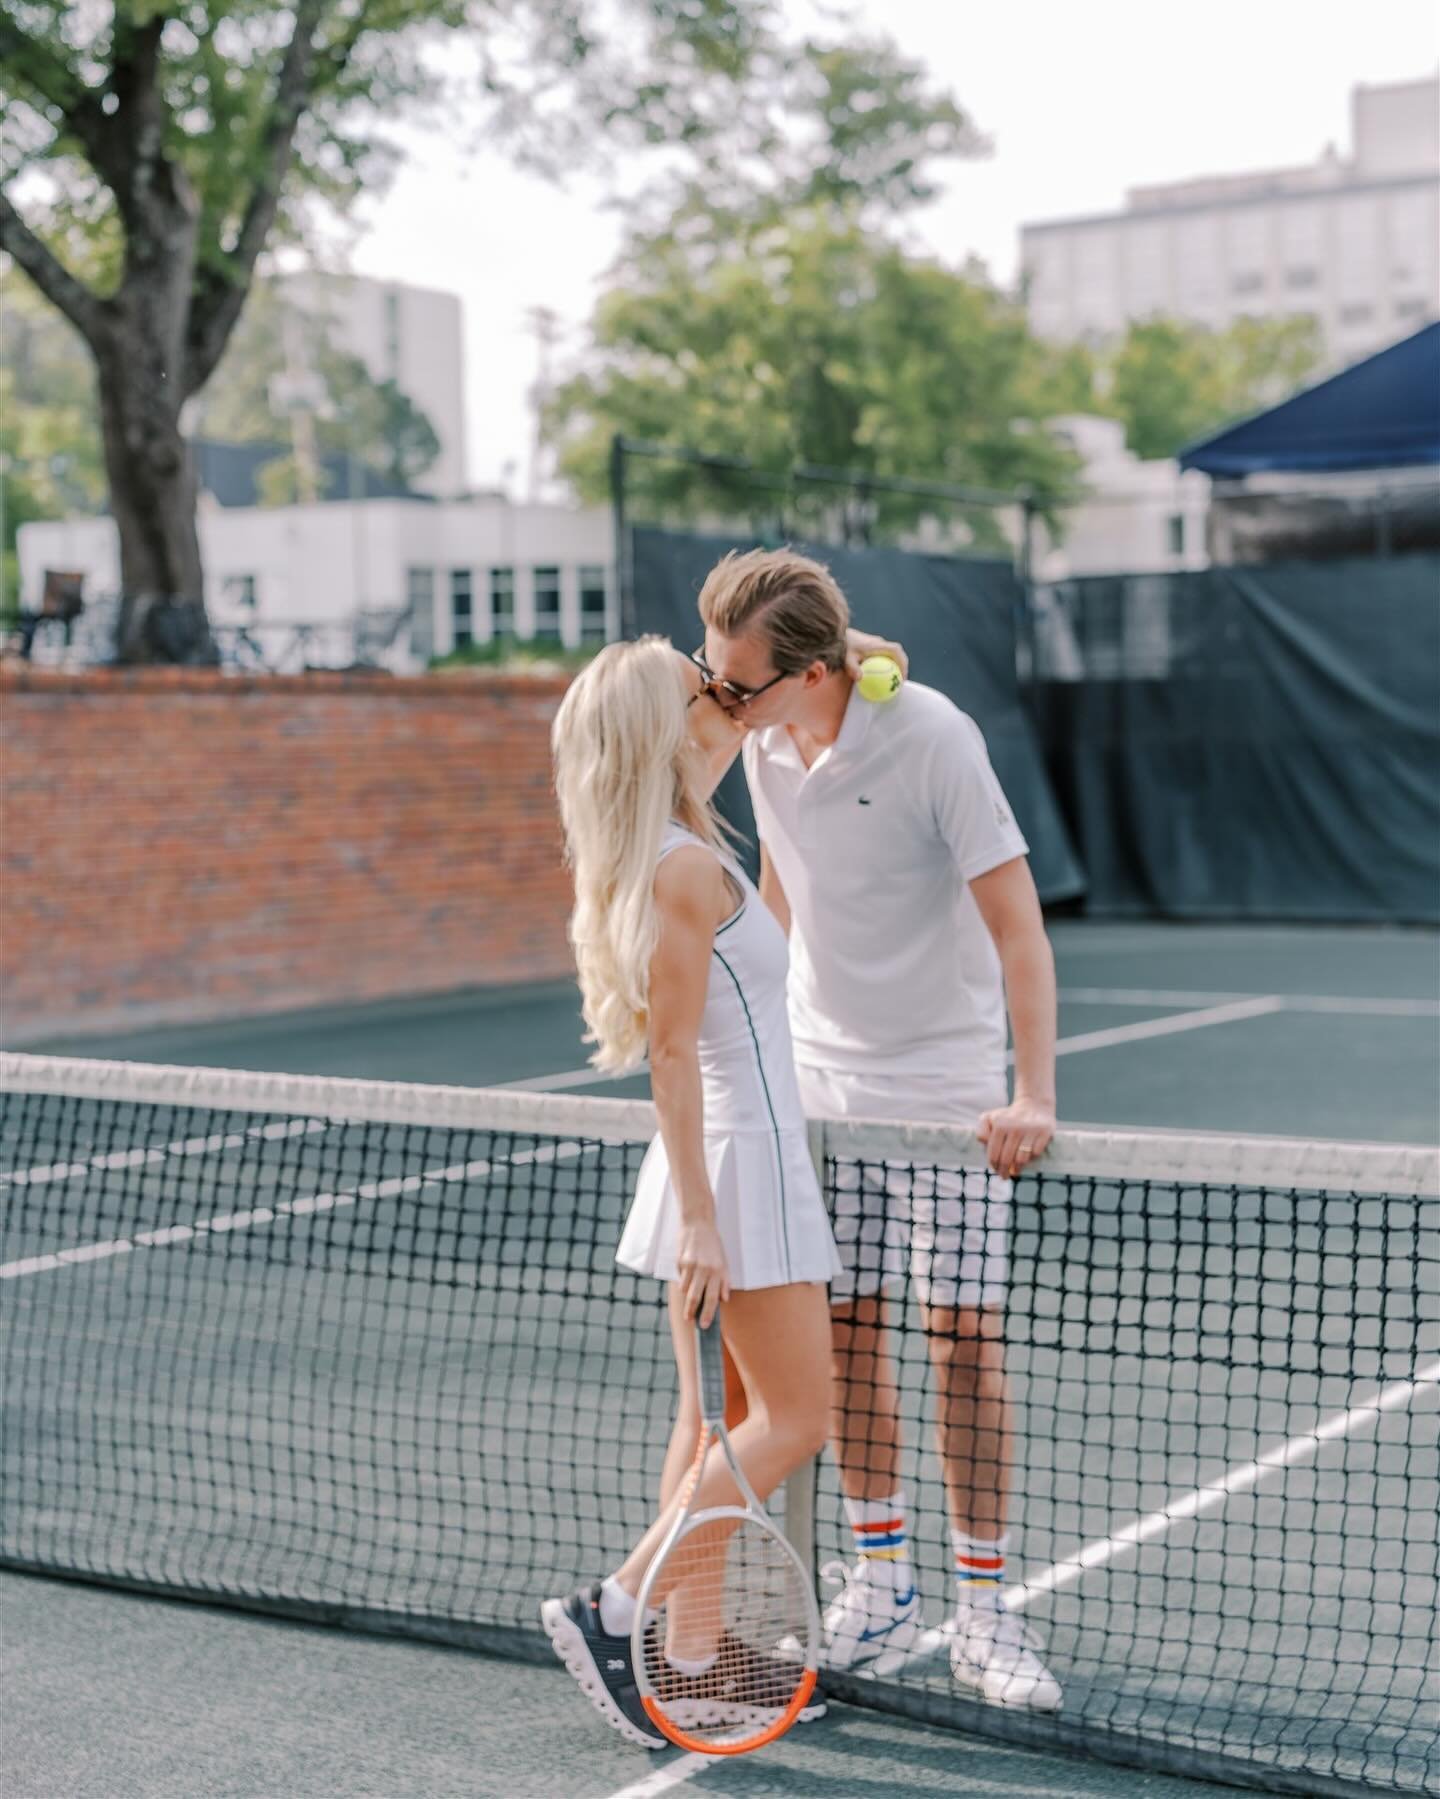 When a handsome German bachelor moves to the US joins a tennis club and meets a single, darling, sweetheart&hellip; talk about the perfect meet cute. Obviously, we had to do a cute tennis themed engagement session! These two have a crazy amazing once